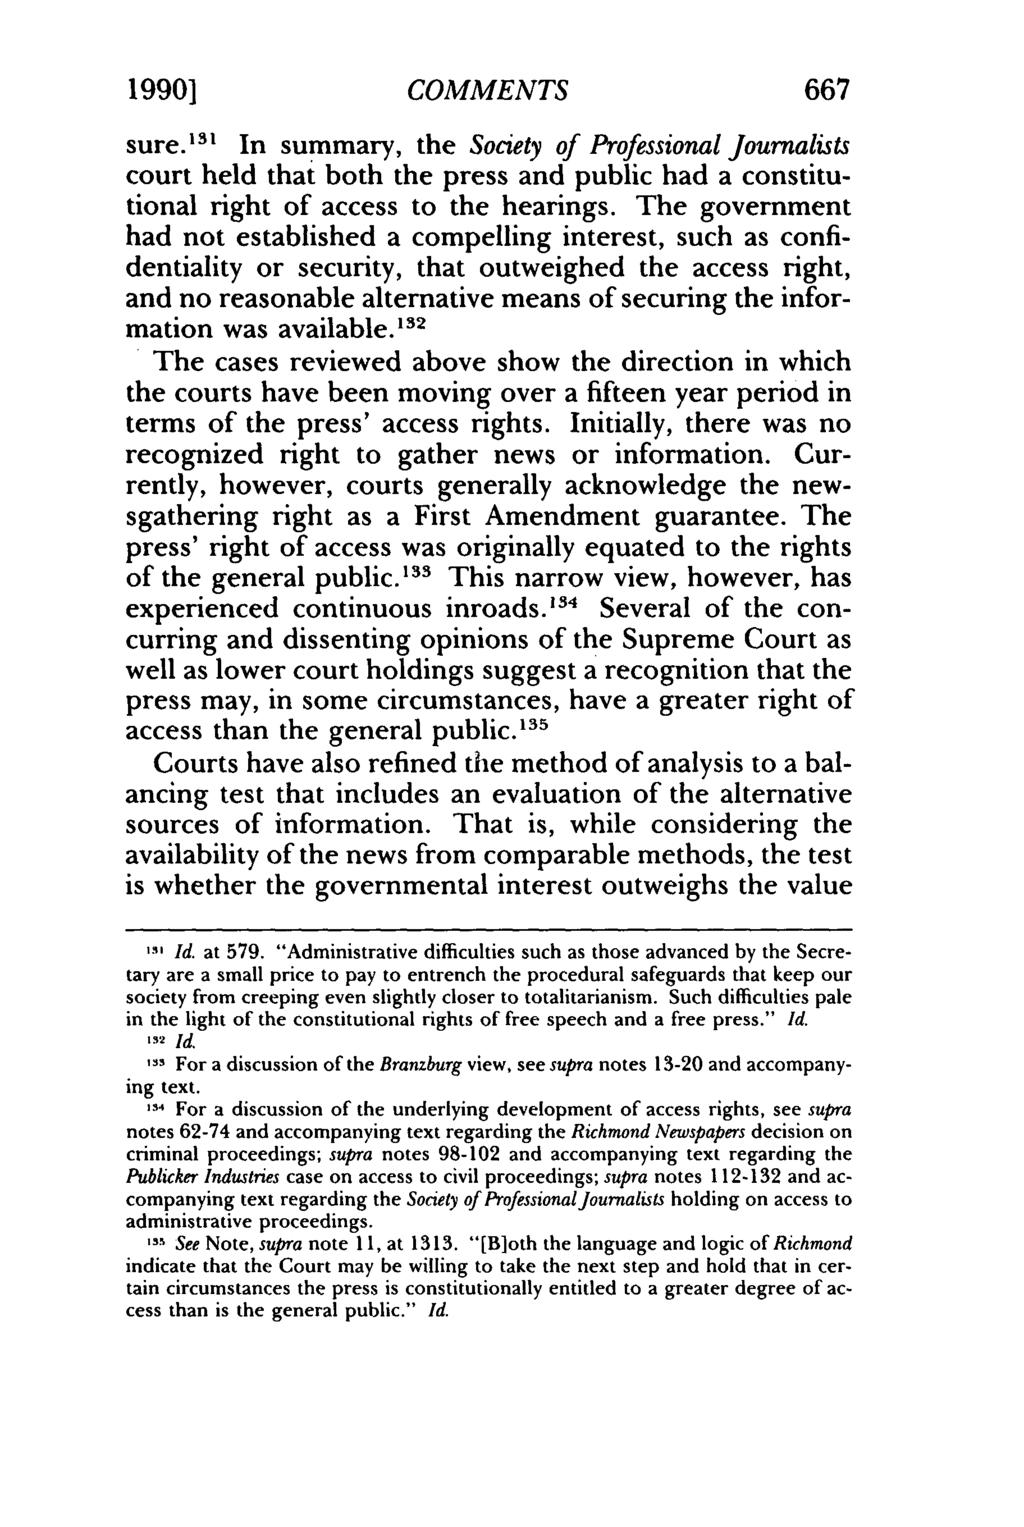 1990] COMMENTS 667 sure.' 3 1 In summary, the Society of Professional Journalists court held that both the press and public had a constitutional right of access to the hearings.